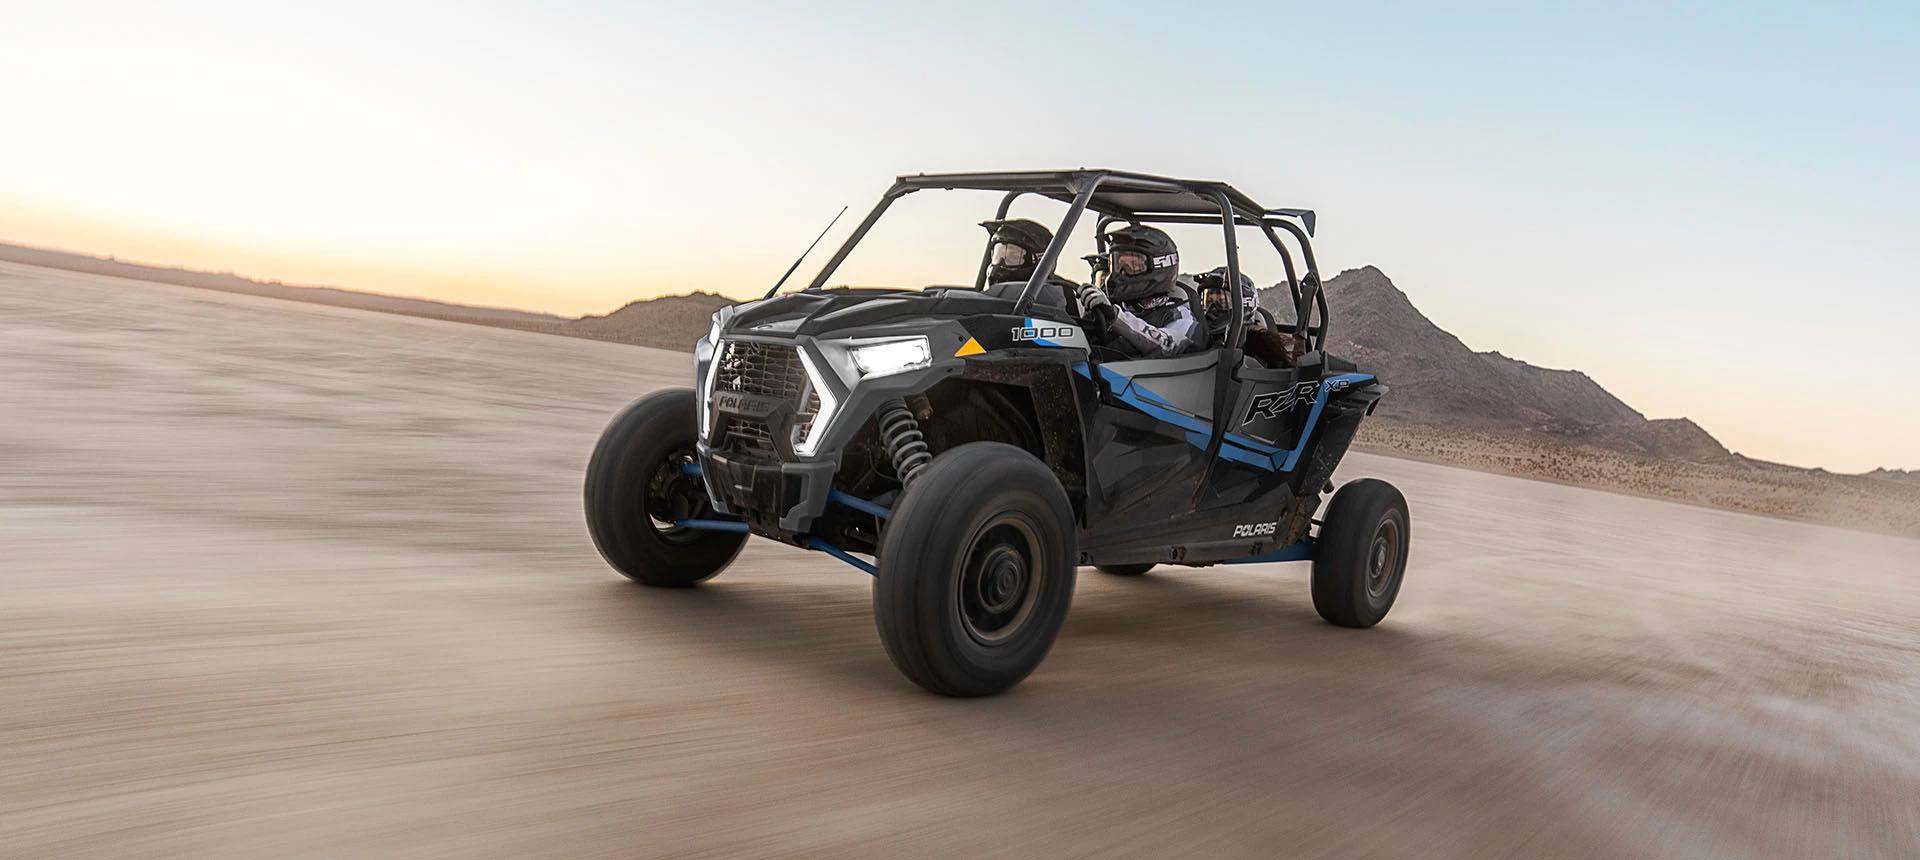 2022 Polaris RZR XP 4 1000 Premium - Ride Command Package in Powell, Wyoming